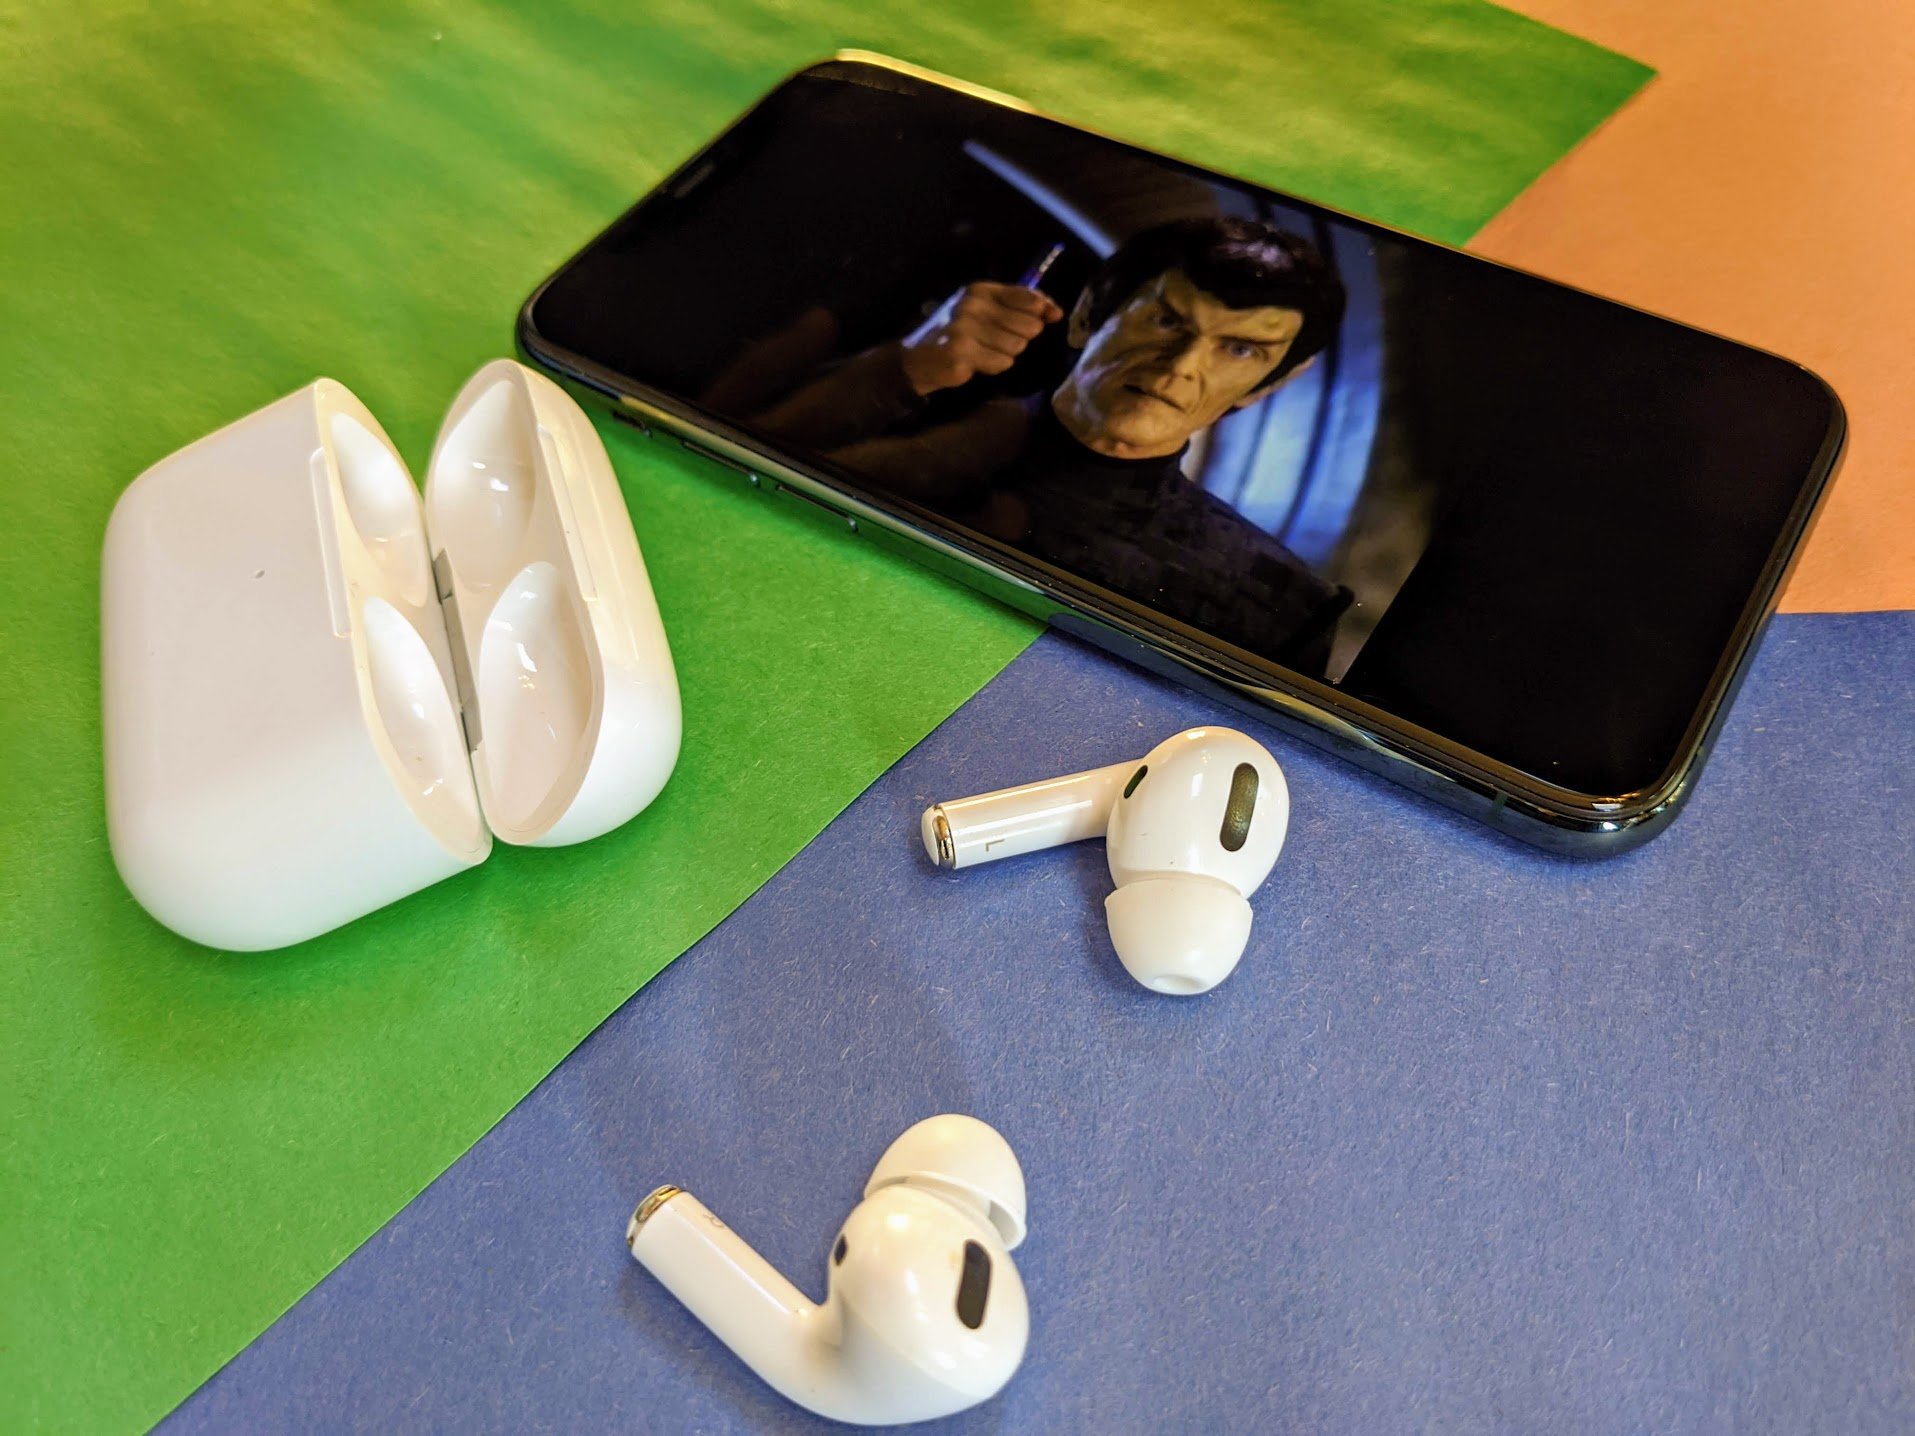 Check out my incredibly convincing counterfeit AirPods Pro ...